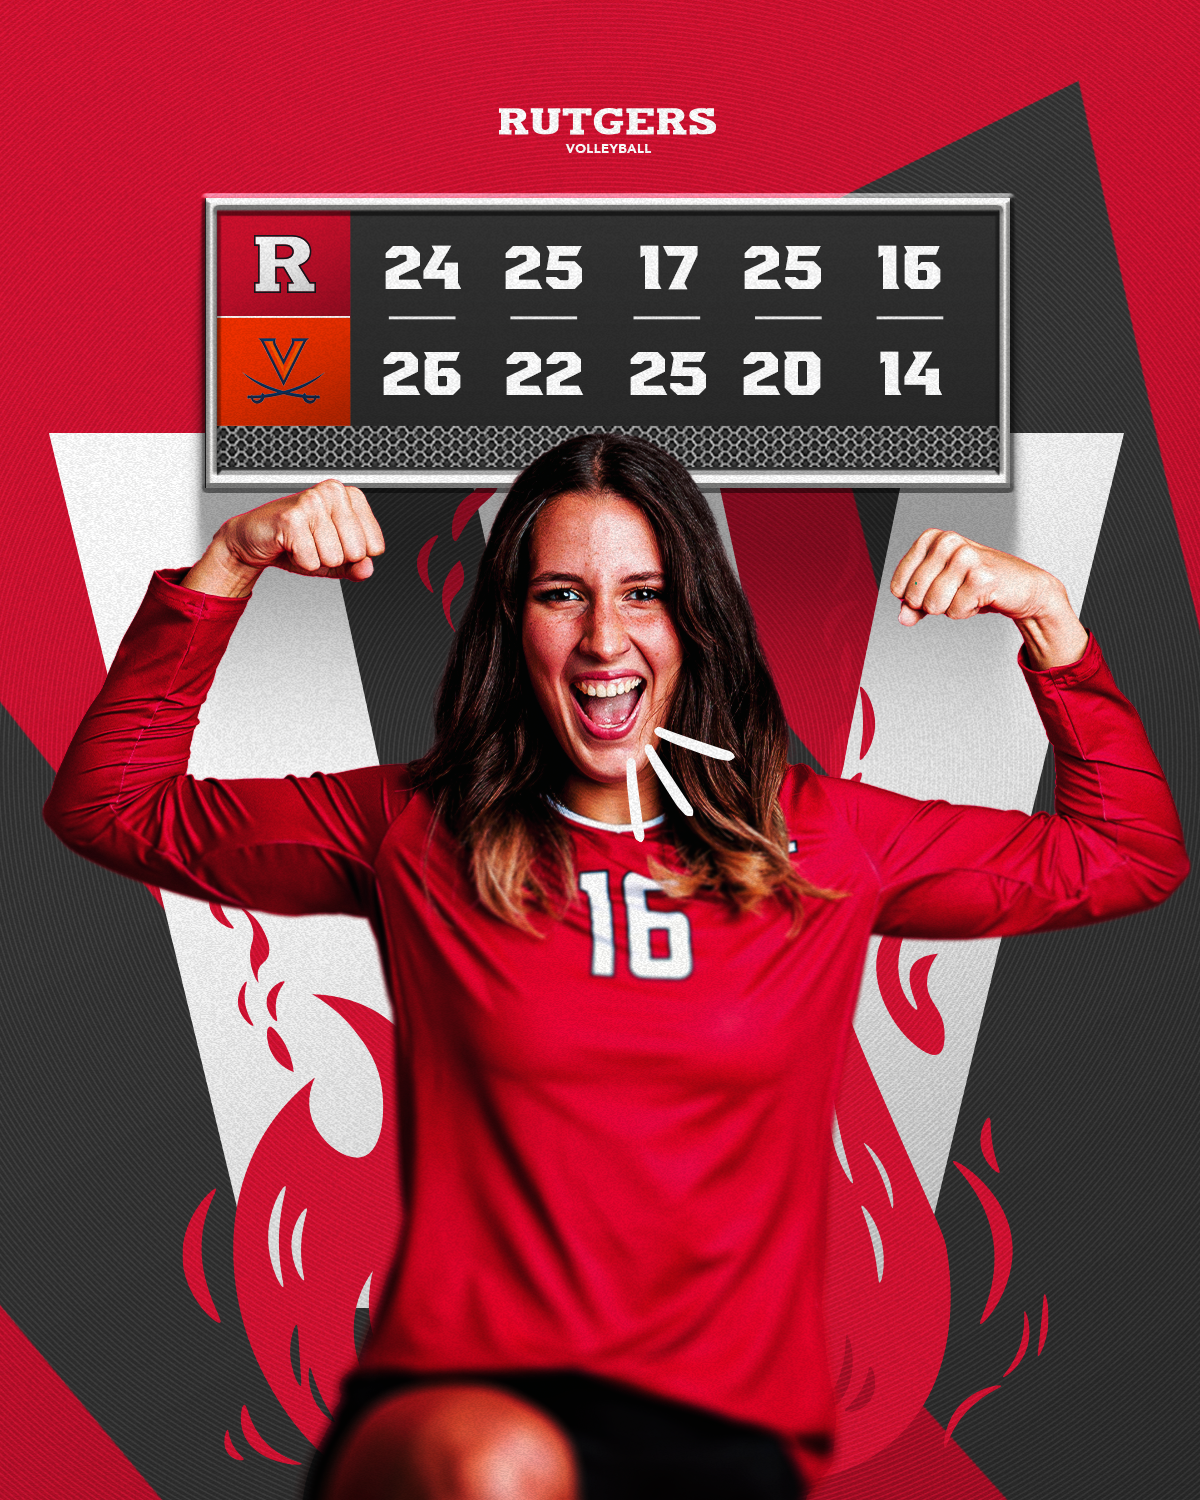 Volleyball win graphic over Virginia featuring Kristina Grkovic